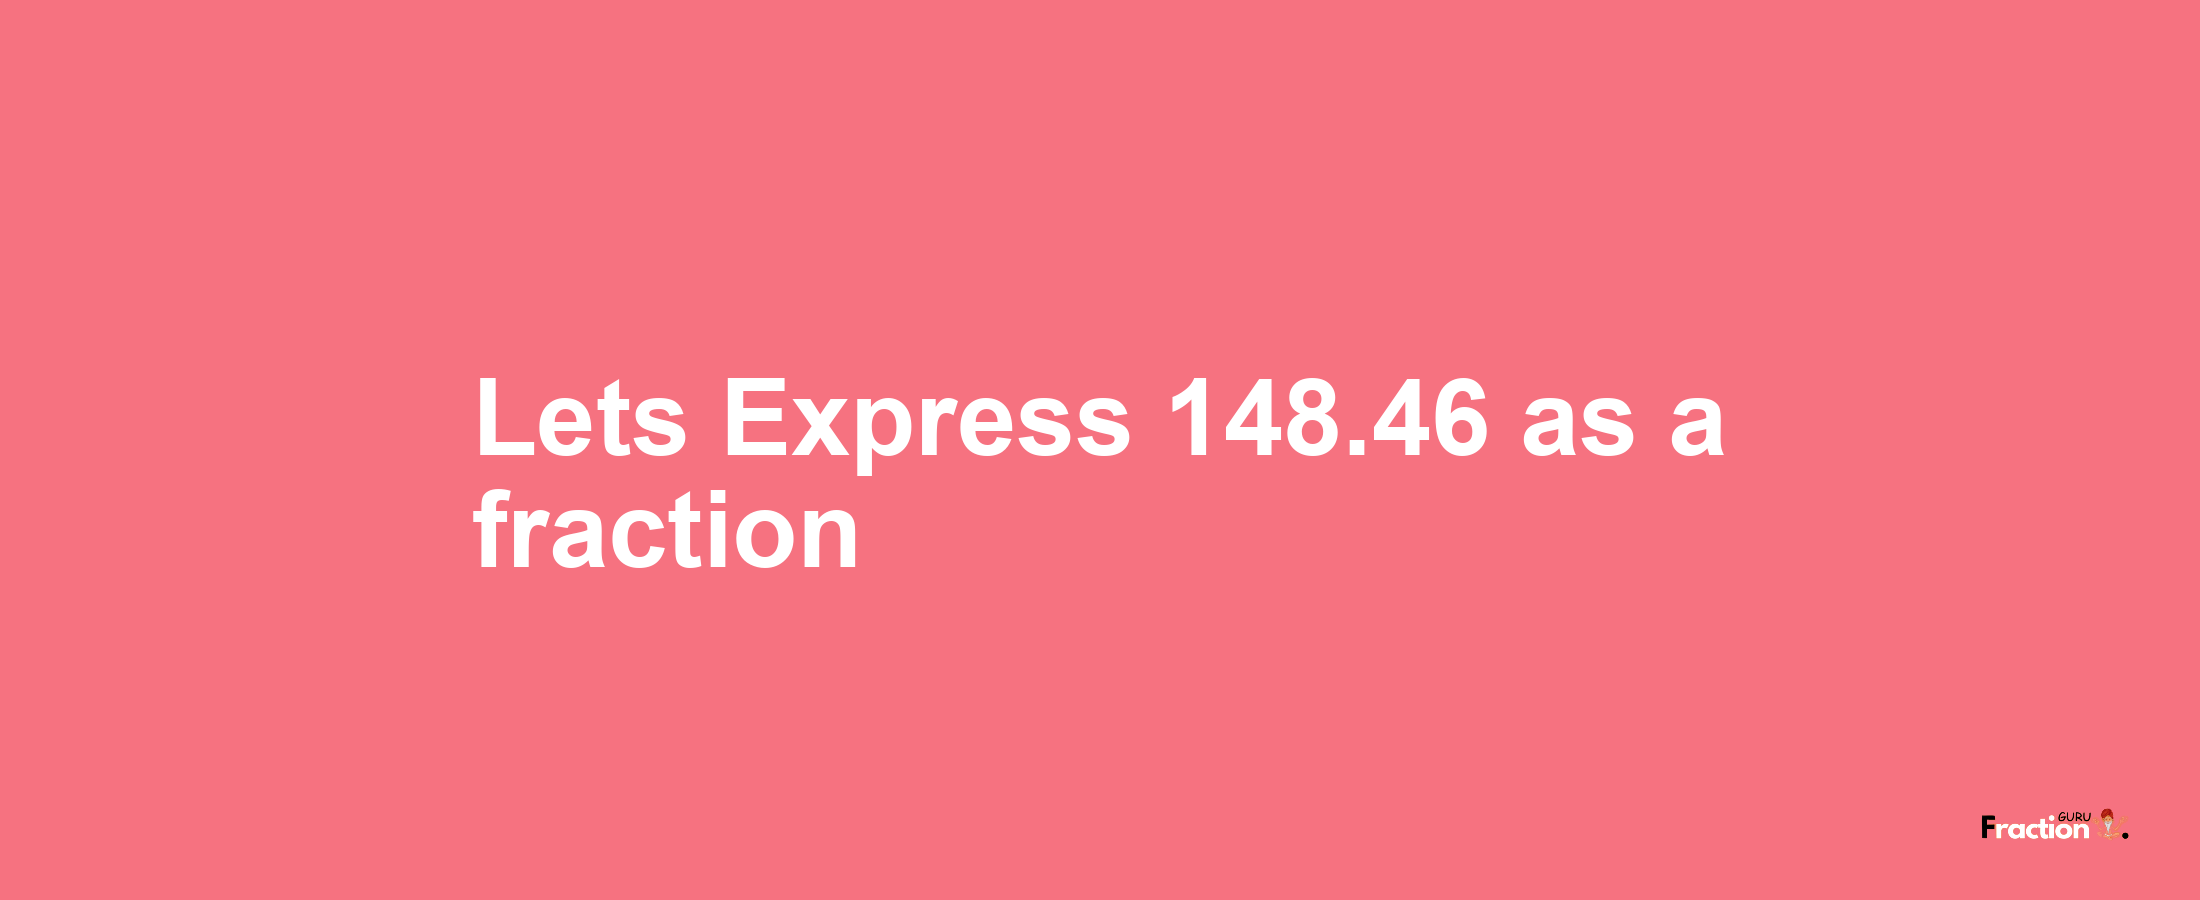 Lets Express 148.46 as afraction